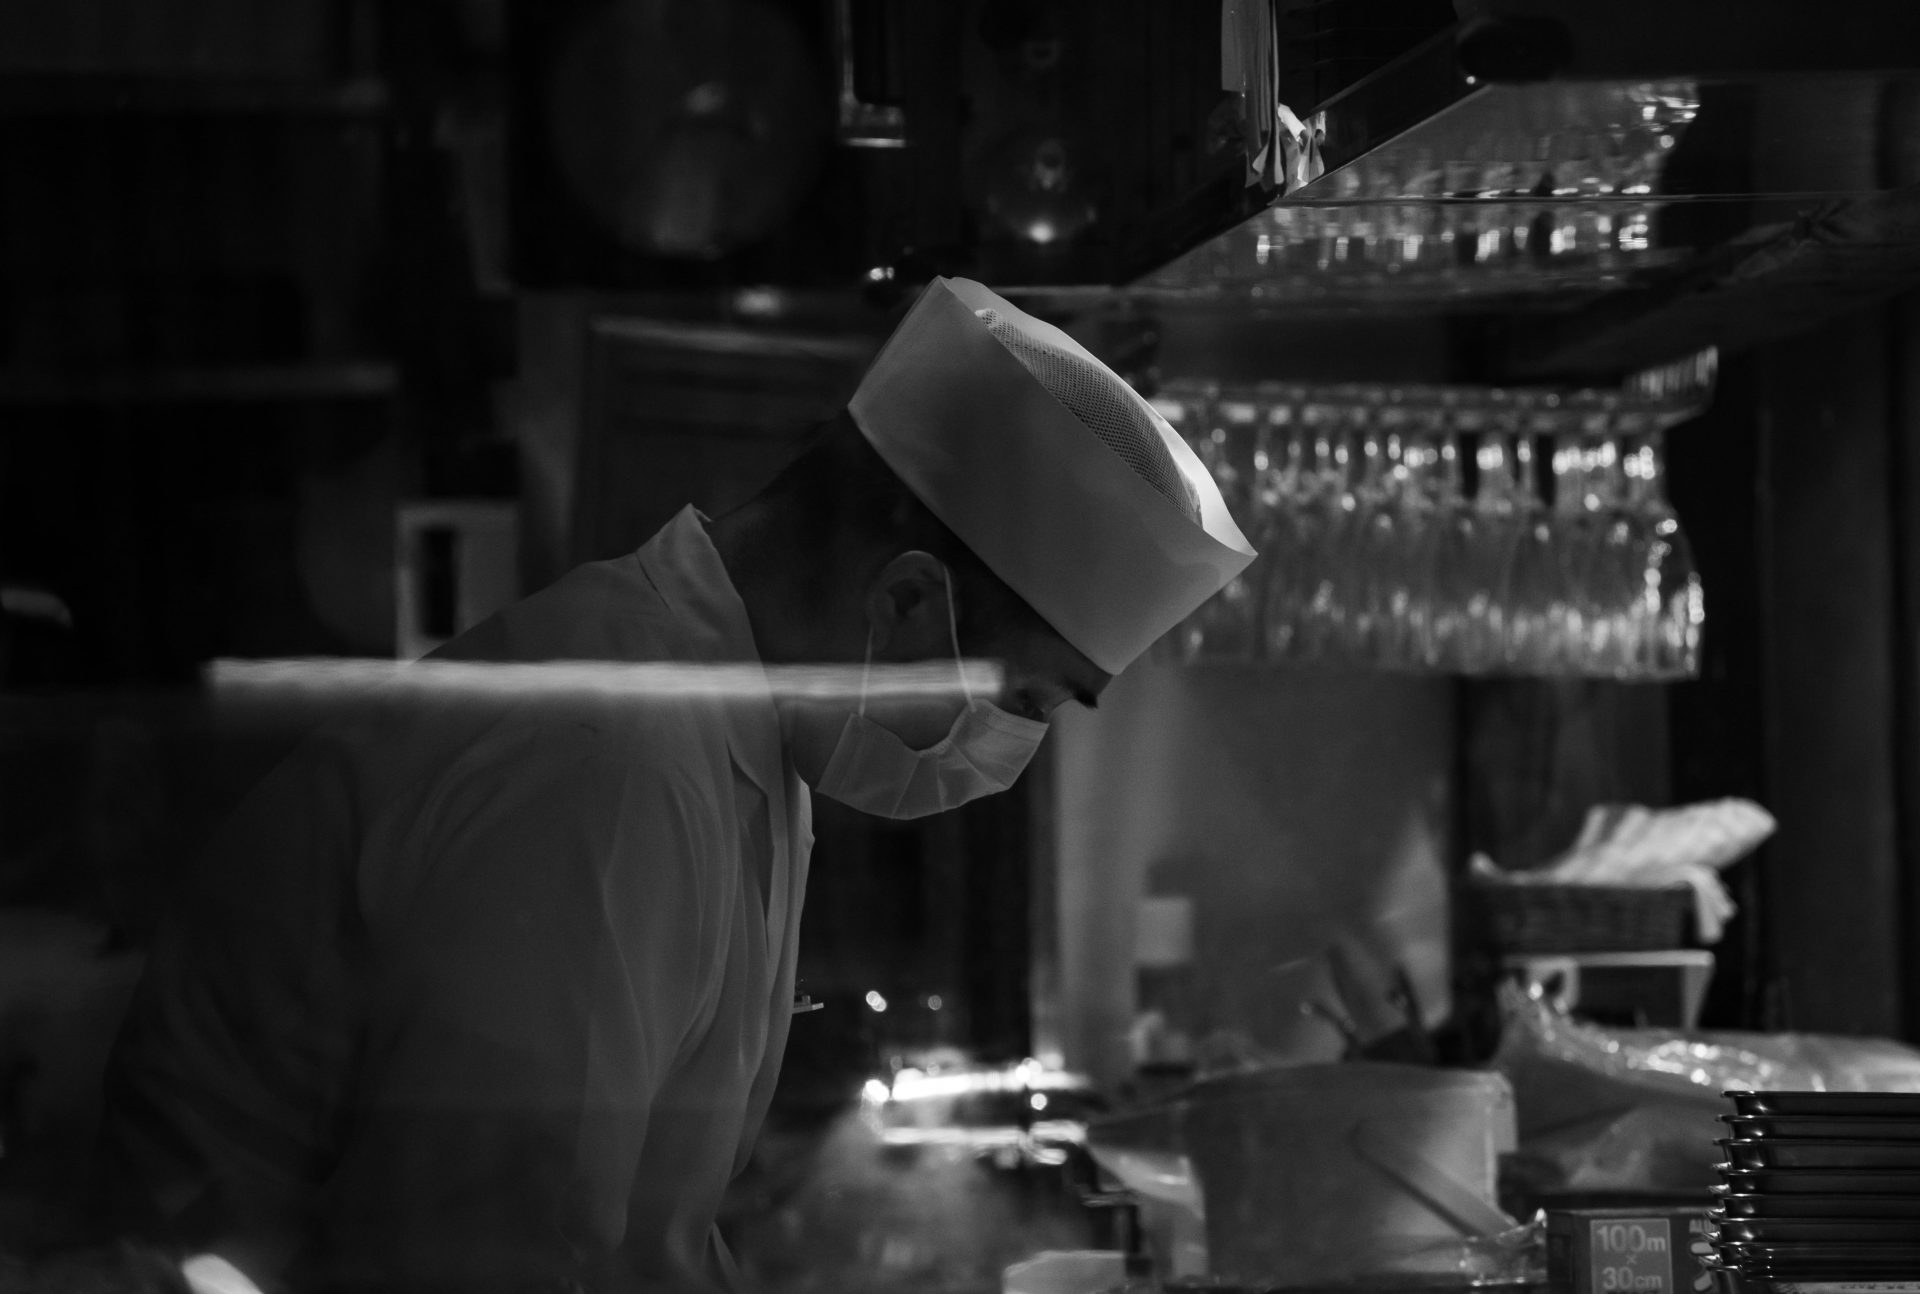 A schef preparing the order for the customer in a Japanse restaurant